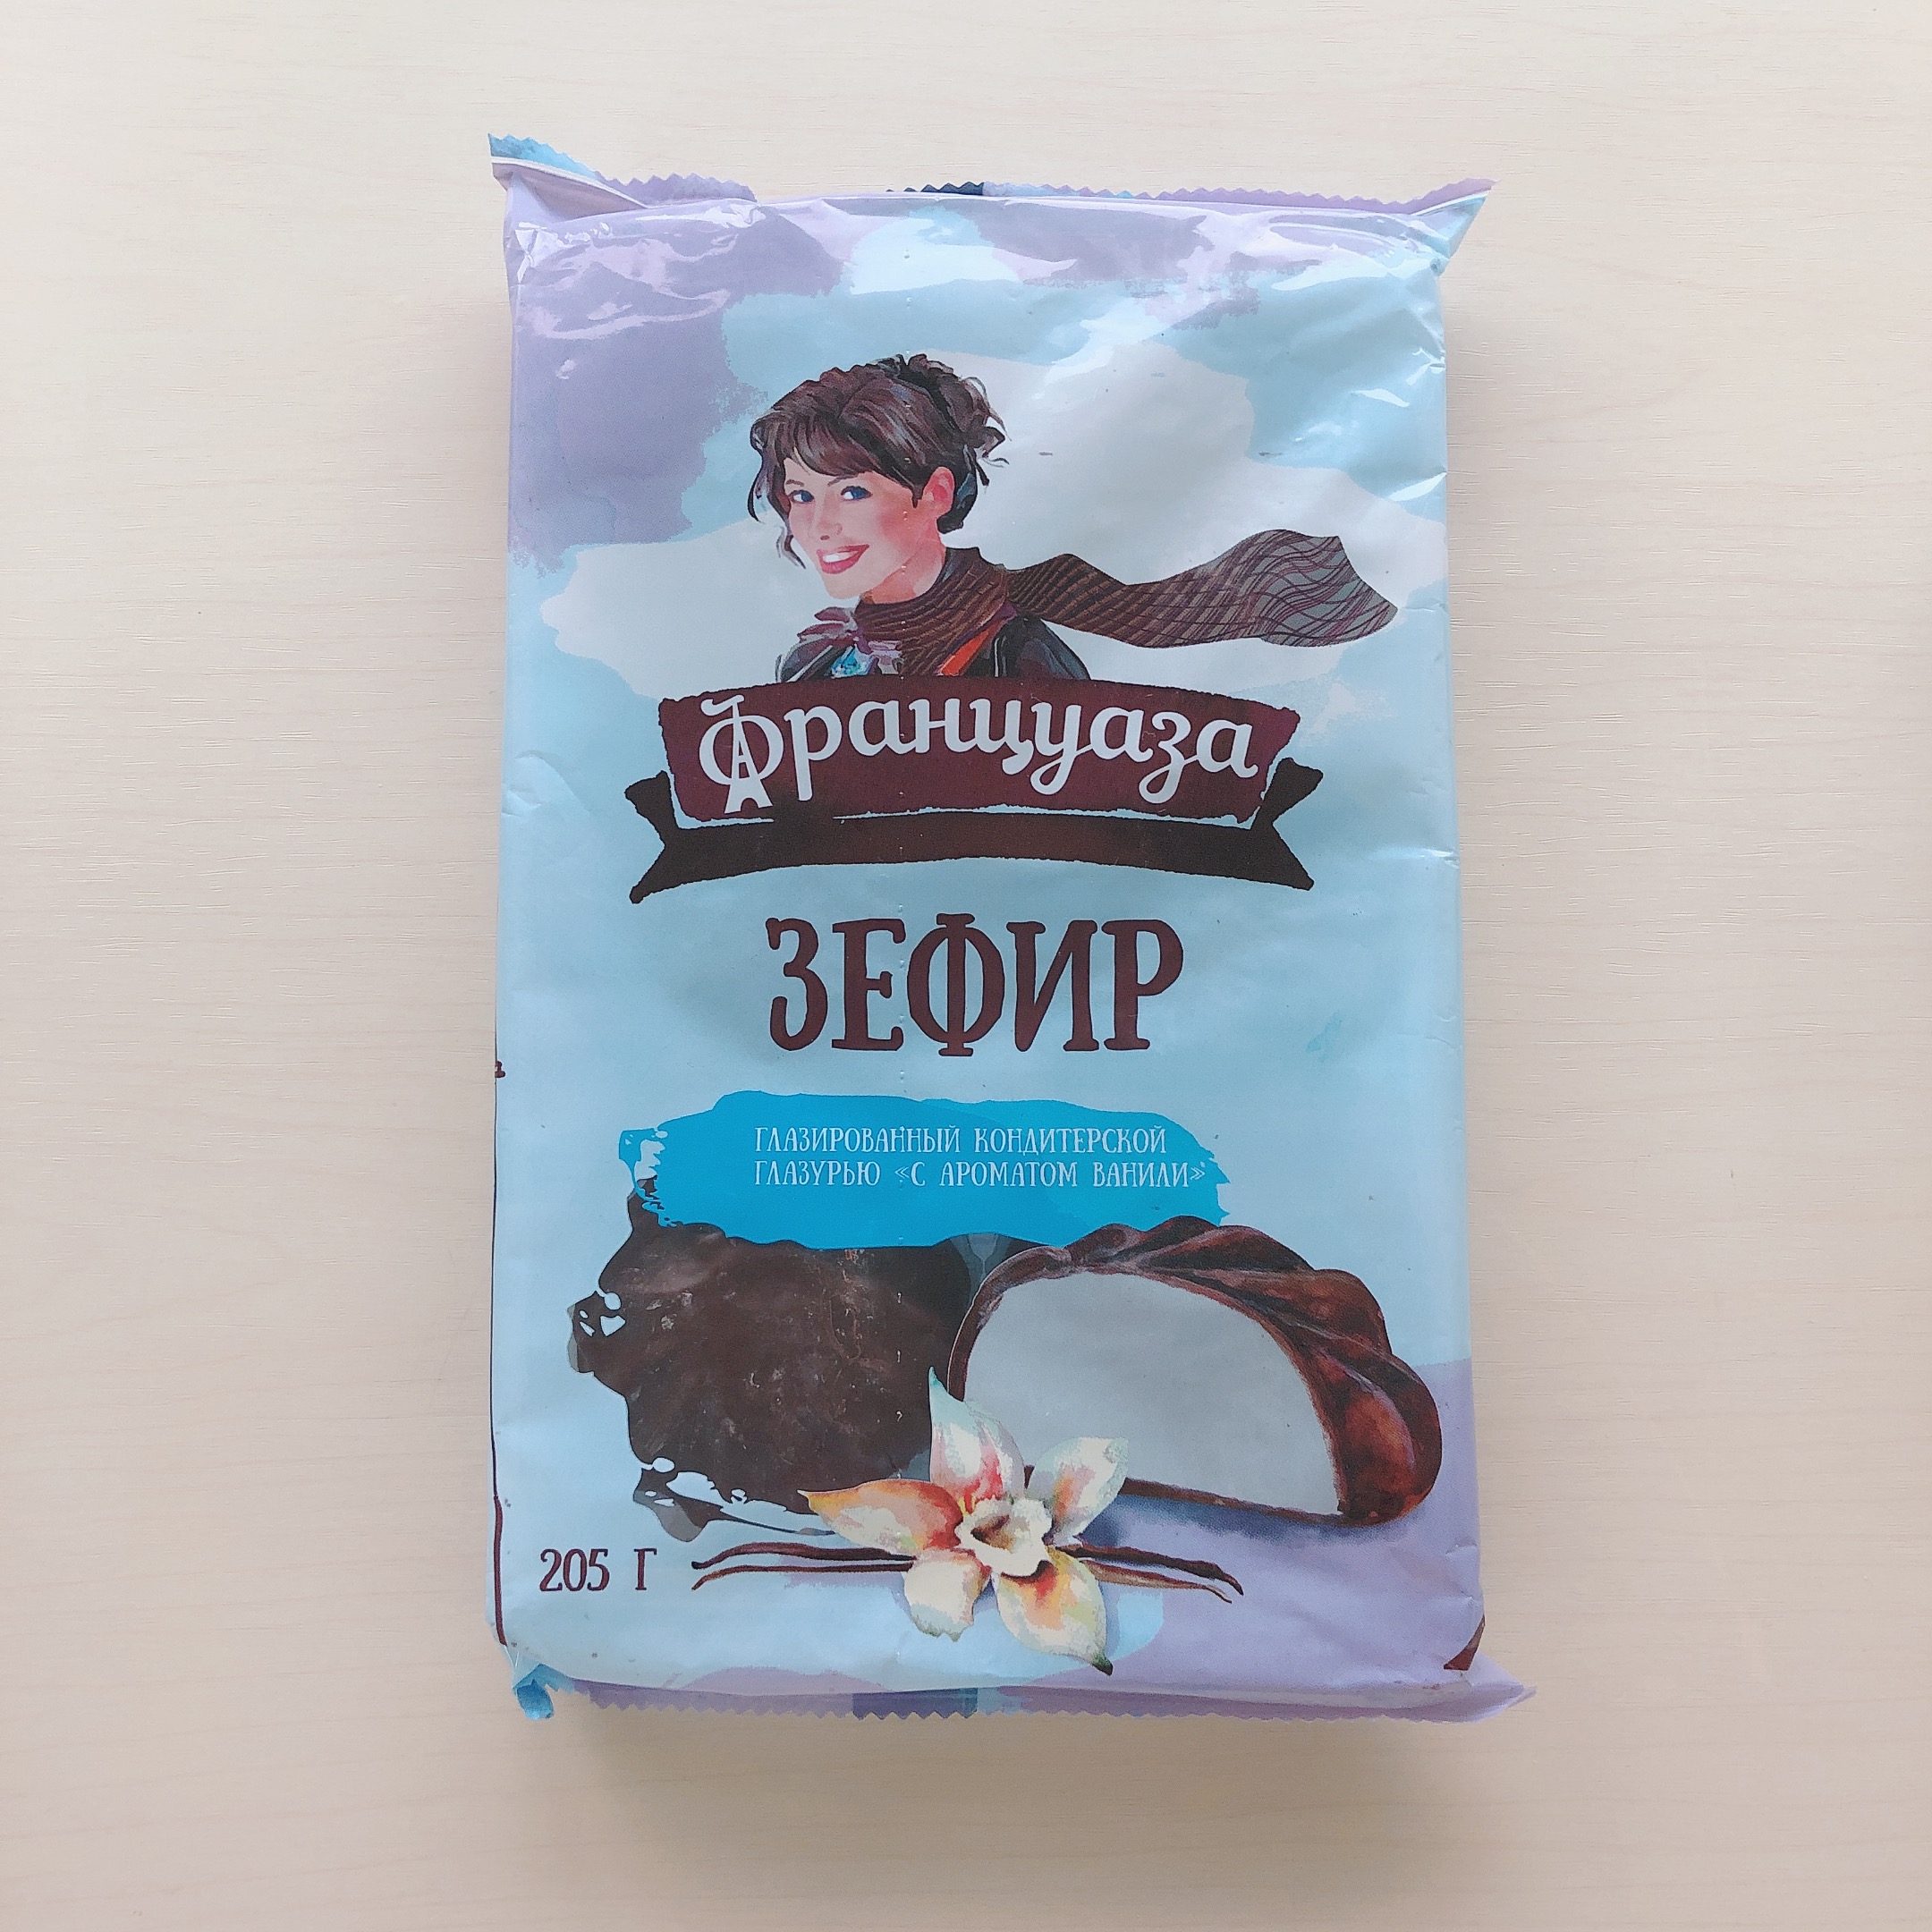 Supply Russian cotton candy cakes or pastries